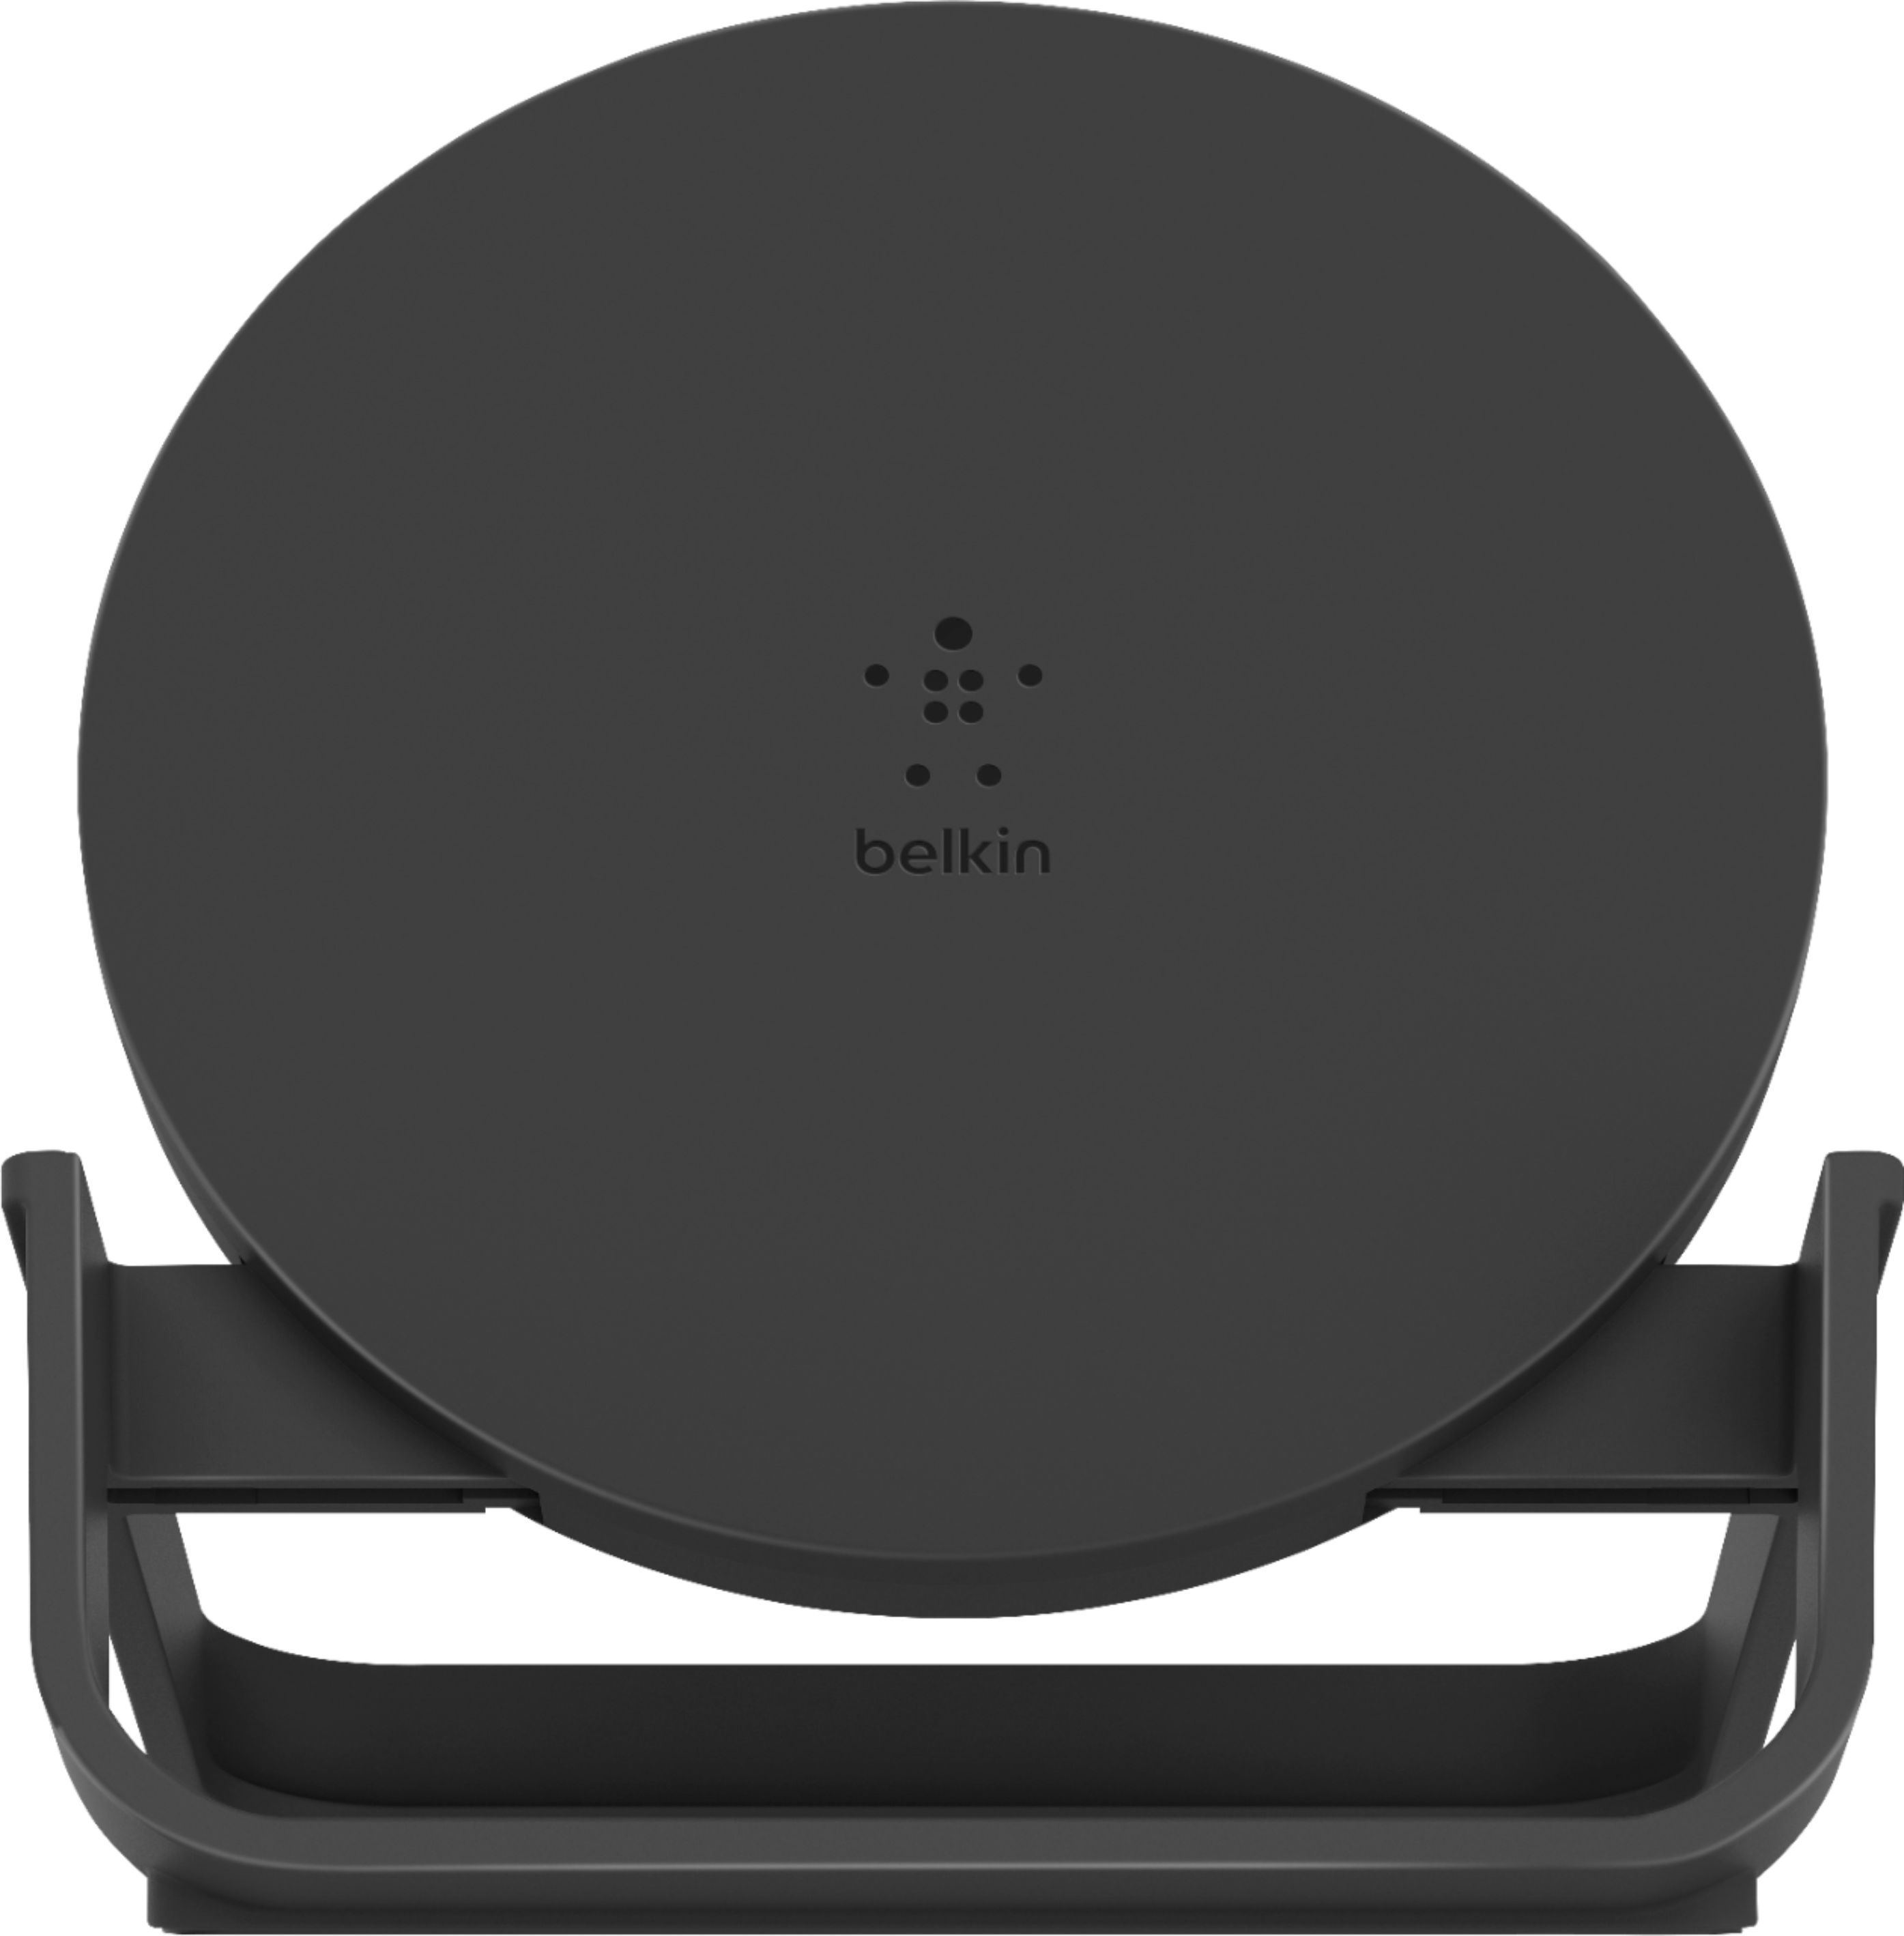  Belkin Boost Up Wireless Charging Stand 10W - Qi Wireless  Charger for iPhone 11, 11 Pro, 11 Pro Max, Xs, XS Max, XR/Samsung Galaxy  S9, S9+, Note9 / LG, Sony and